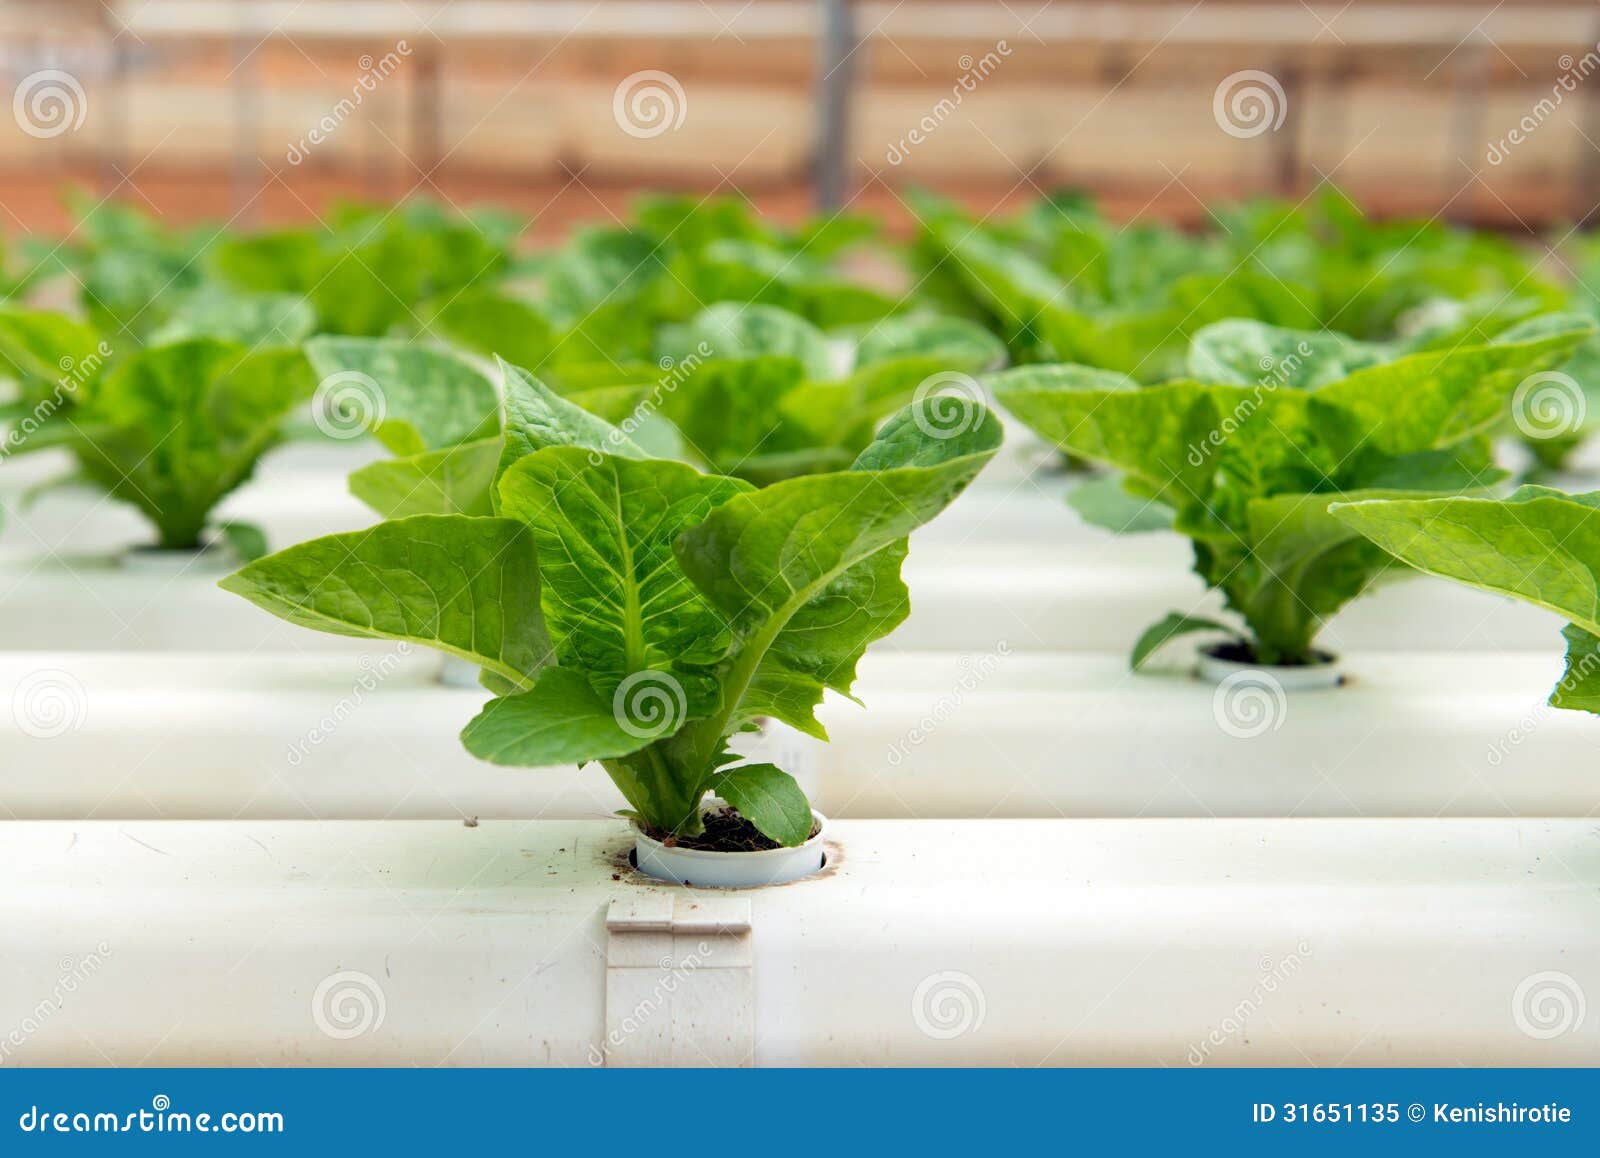 Hydroponic Vegetable Royalty Free Stock Photo - Image: 31651135